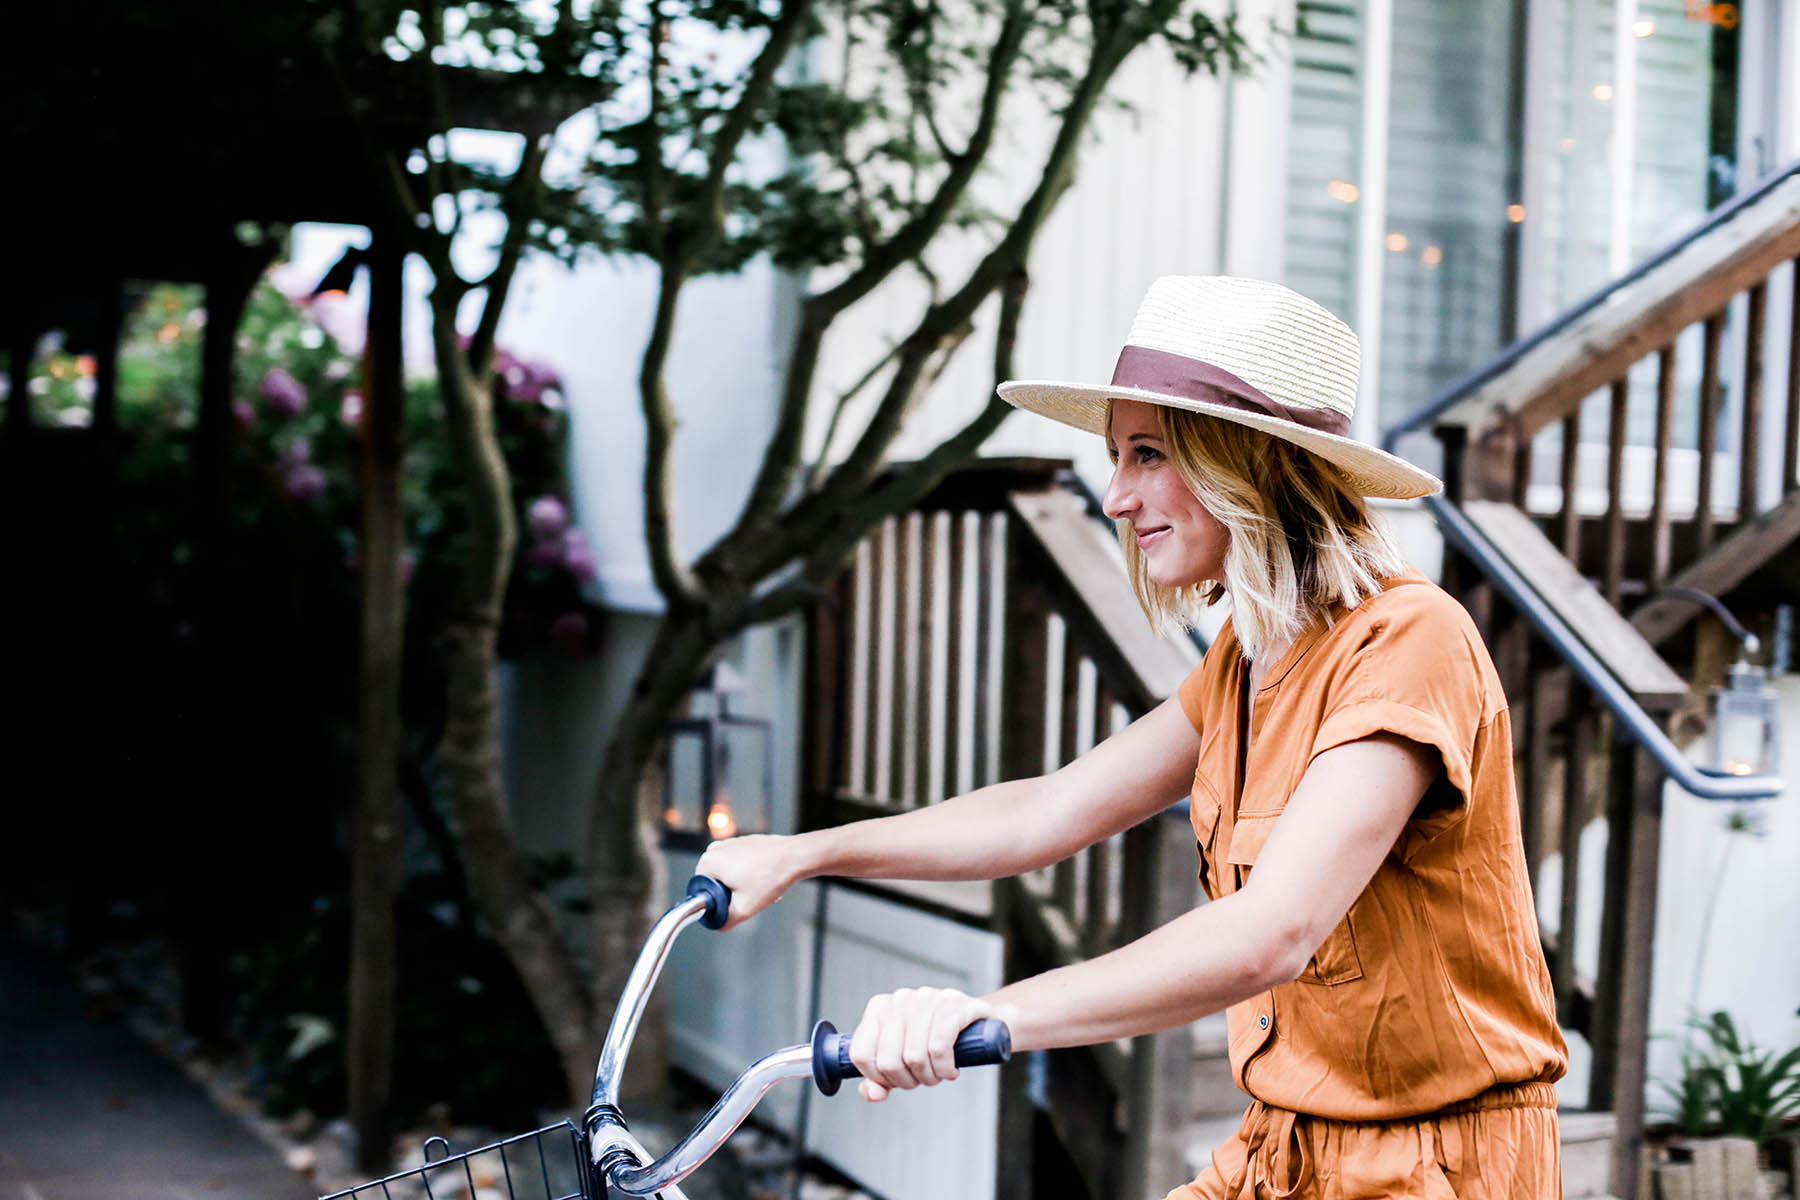 Amanda Holstein riding bikes in Old Navy romper and woven fedora hat